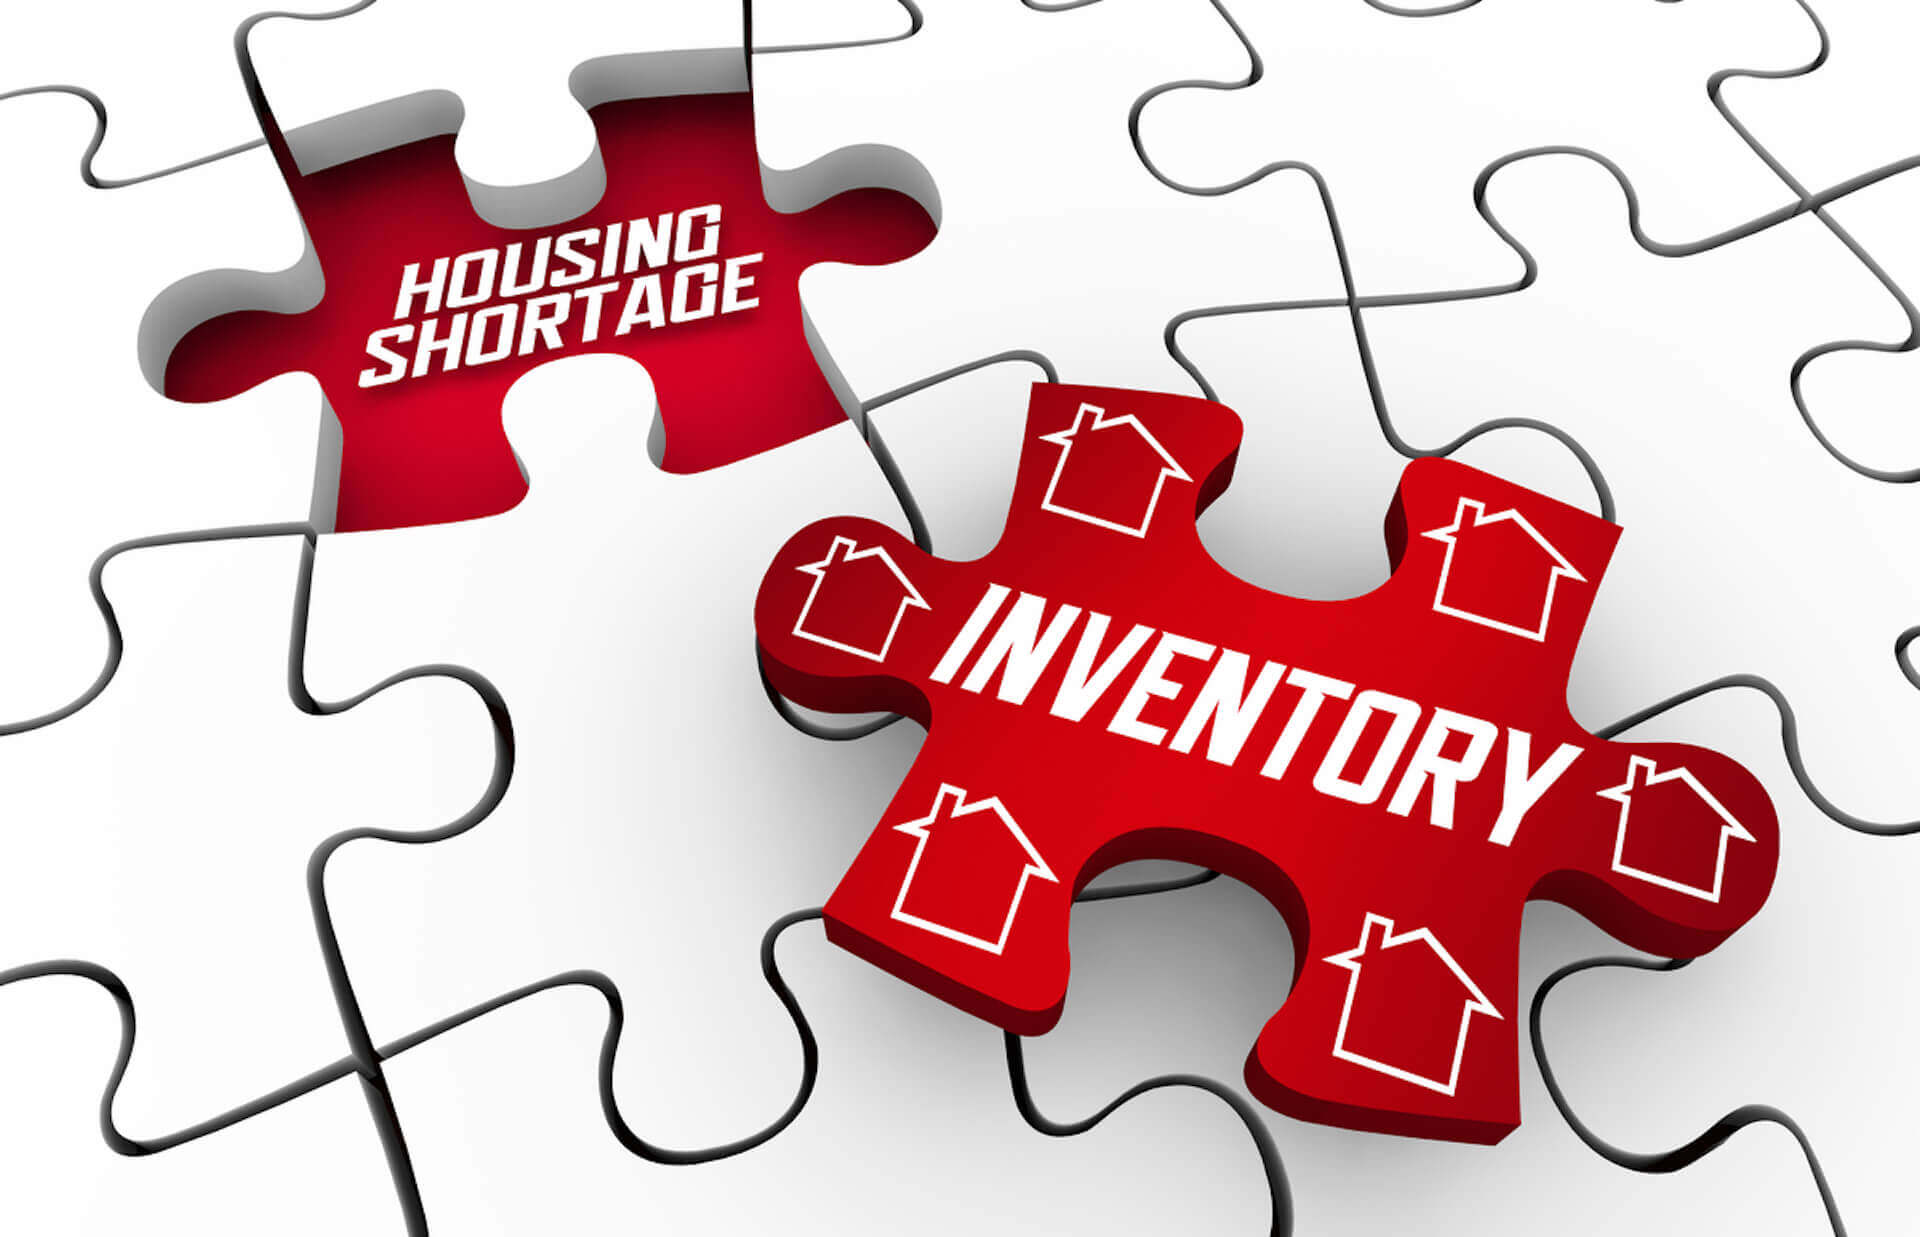 Puzzle piece showing inventory and housing shortage perfect fit